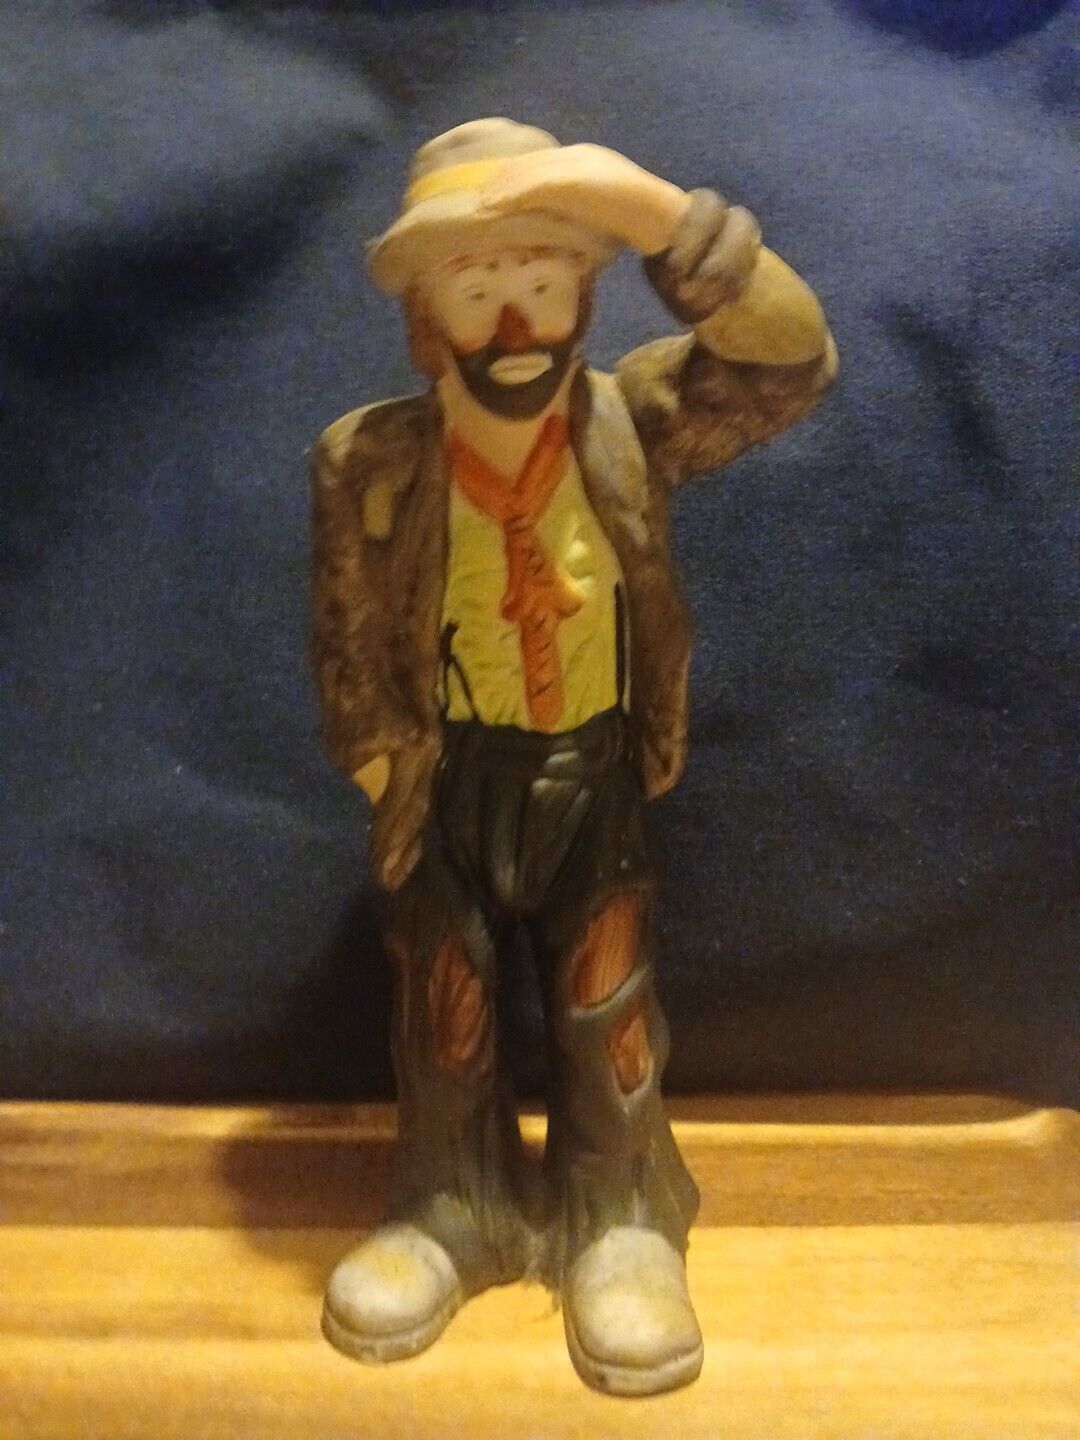 Emmett Kelly Jr. Looking Out to See Hobo Clown Figurine by Flambro